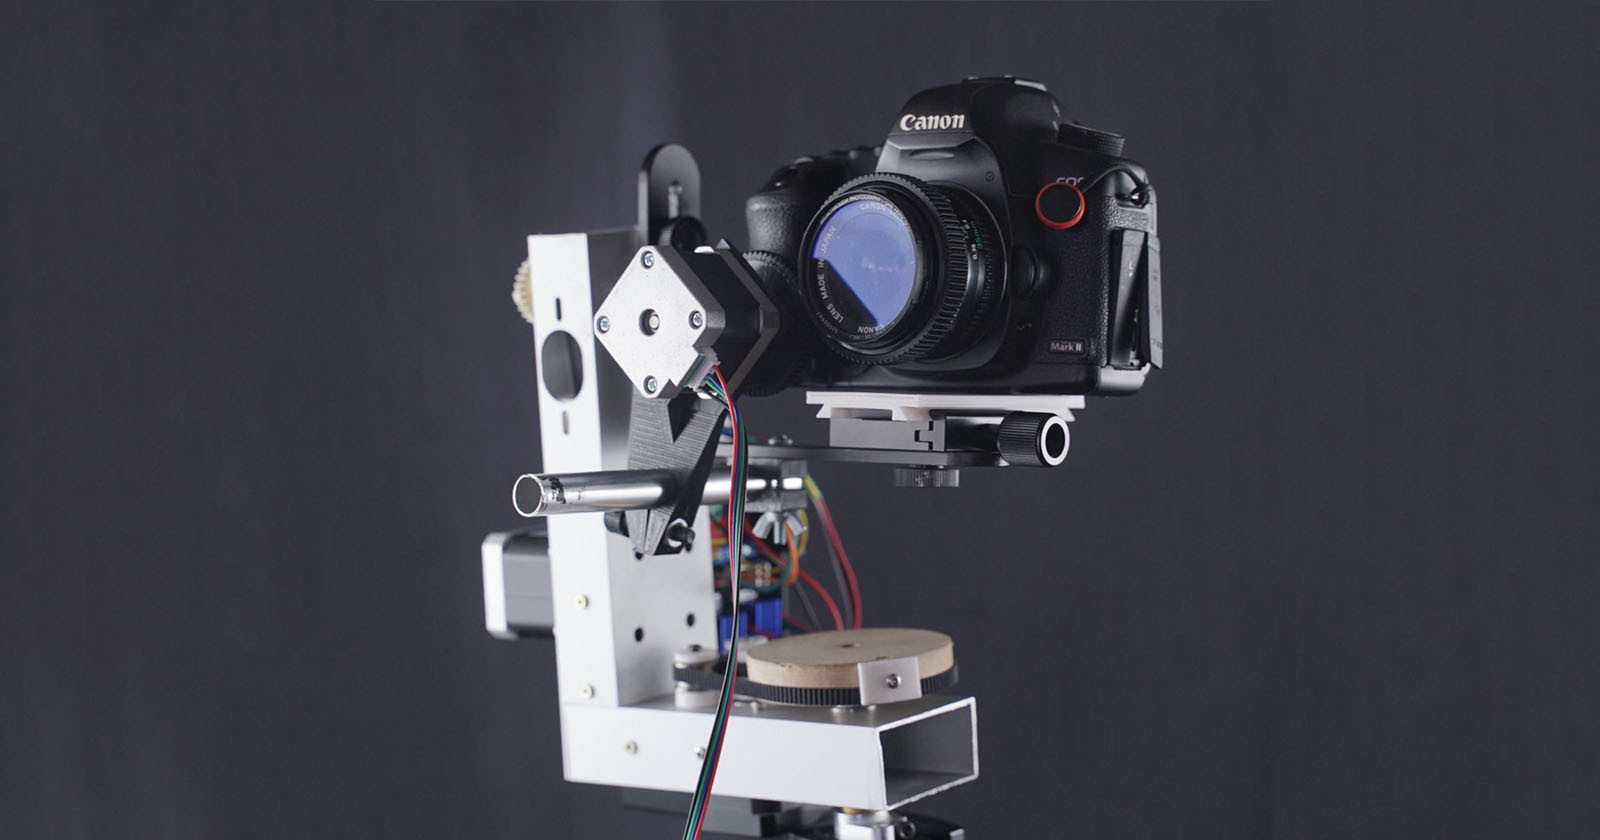 DIY Motorized Camera Rig Built from Recycled 3D Printer Parts